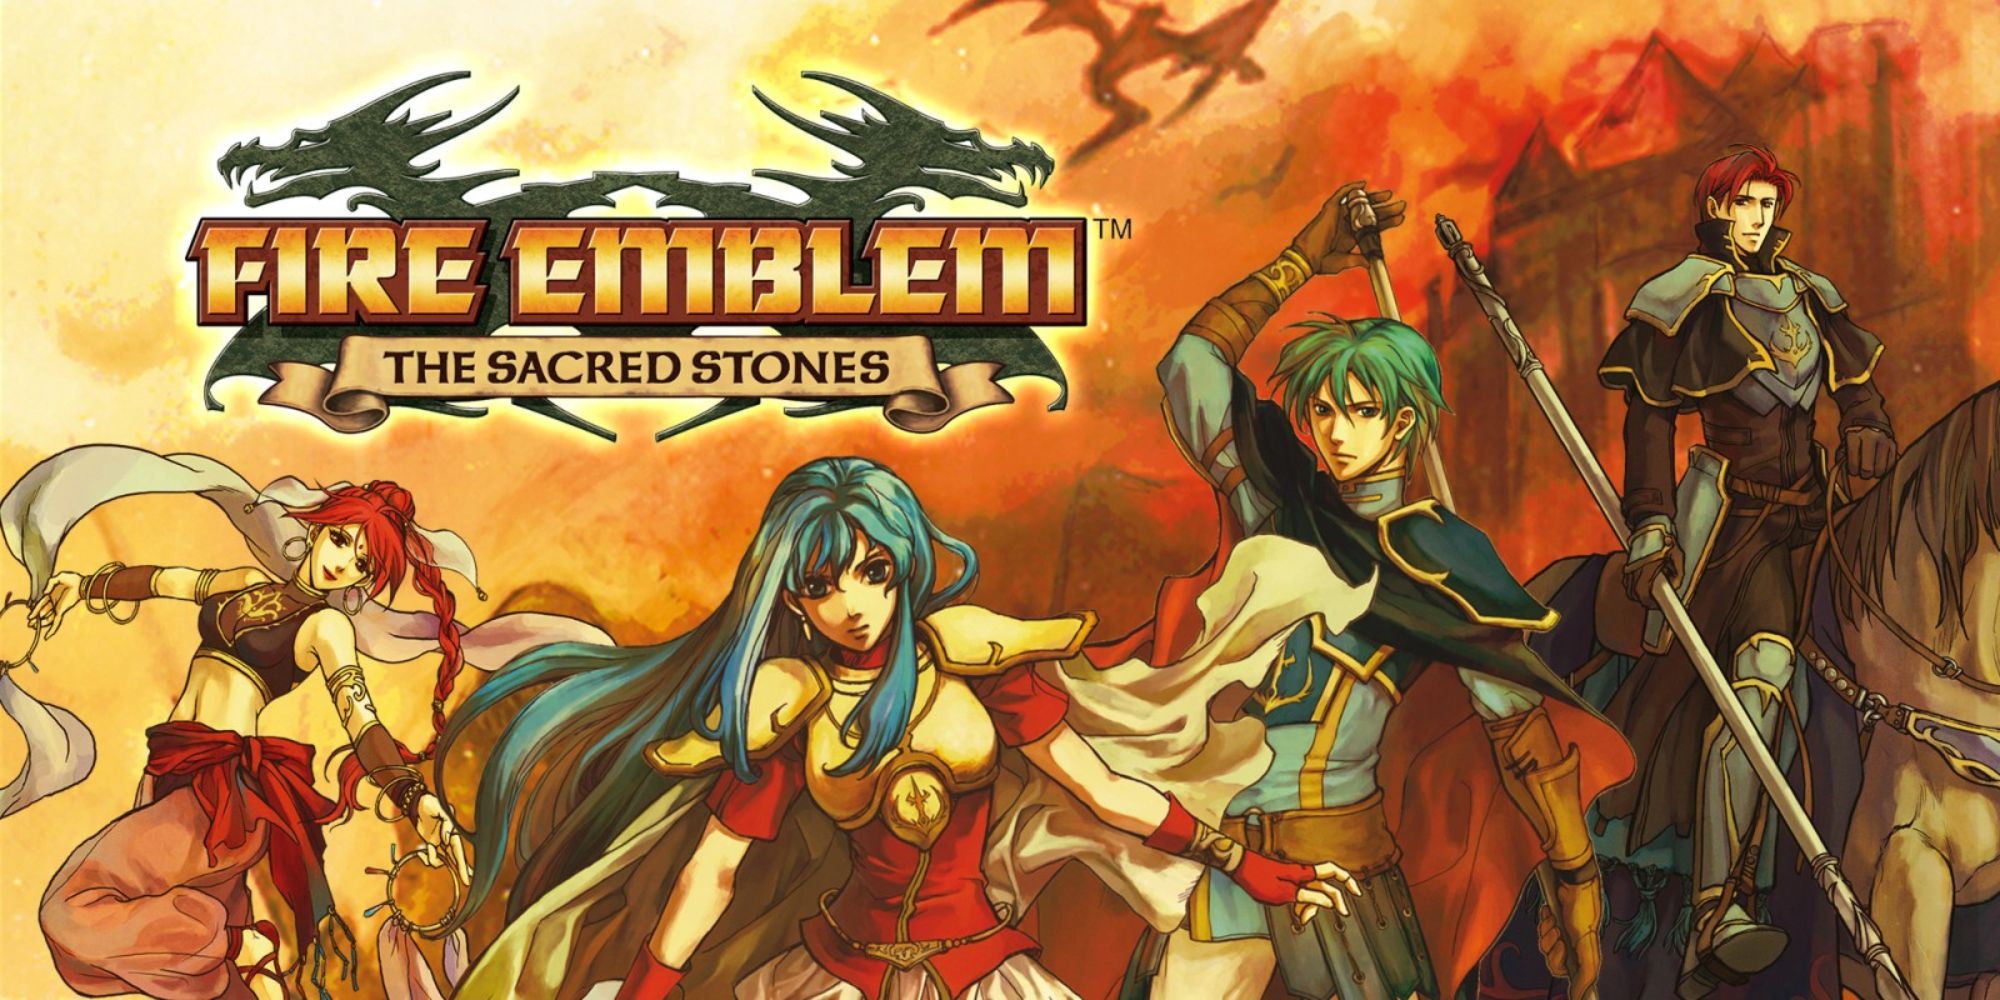 The cover art for Fire Emblem: The Sacred Stones